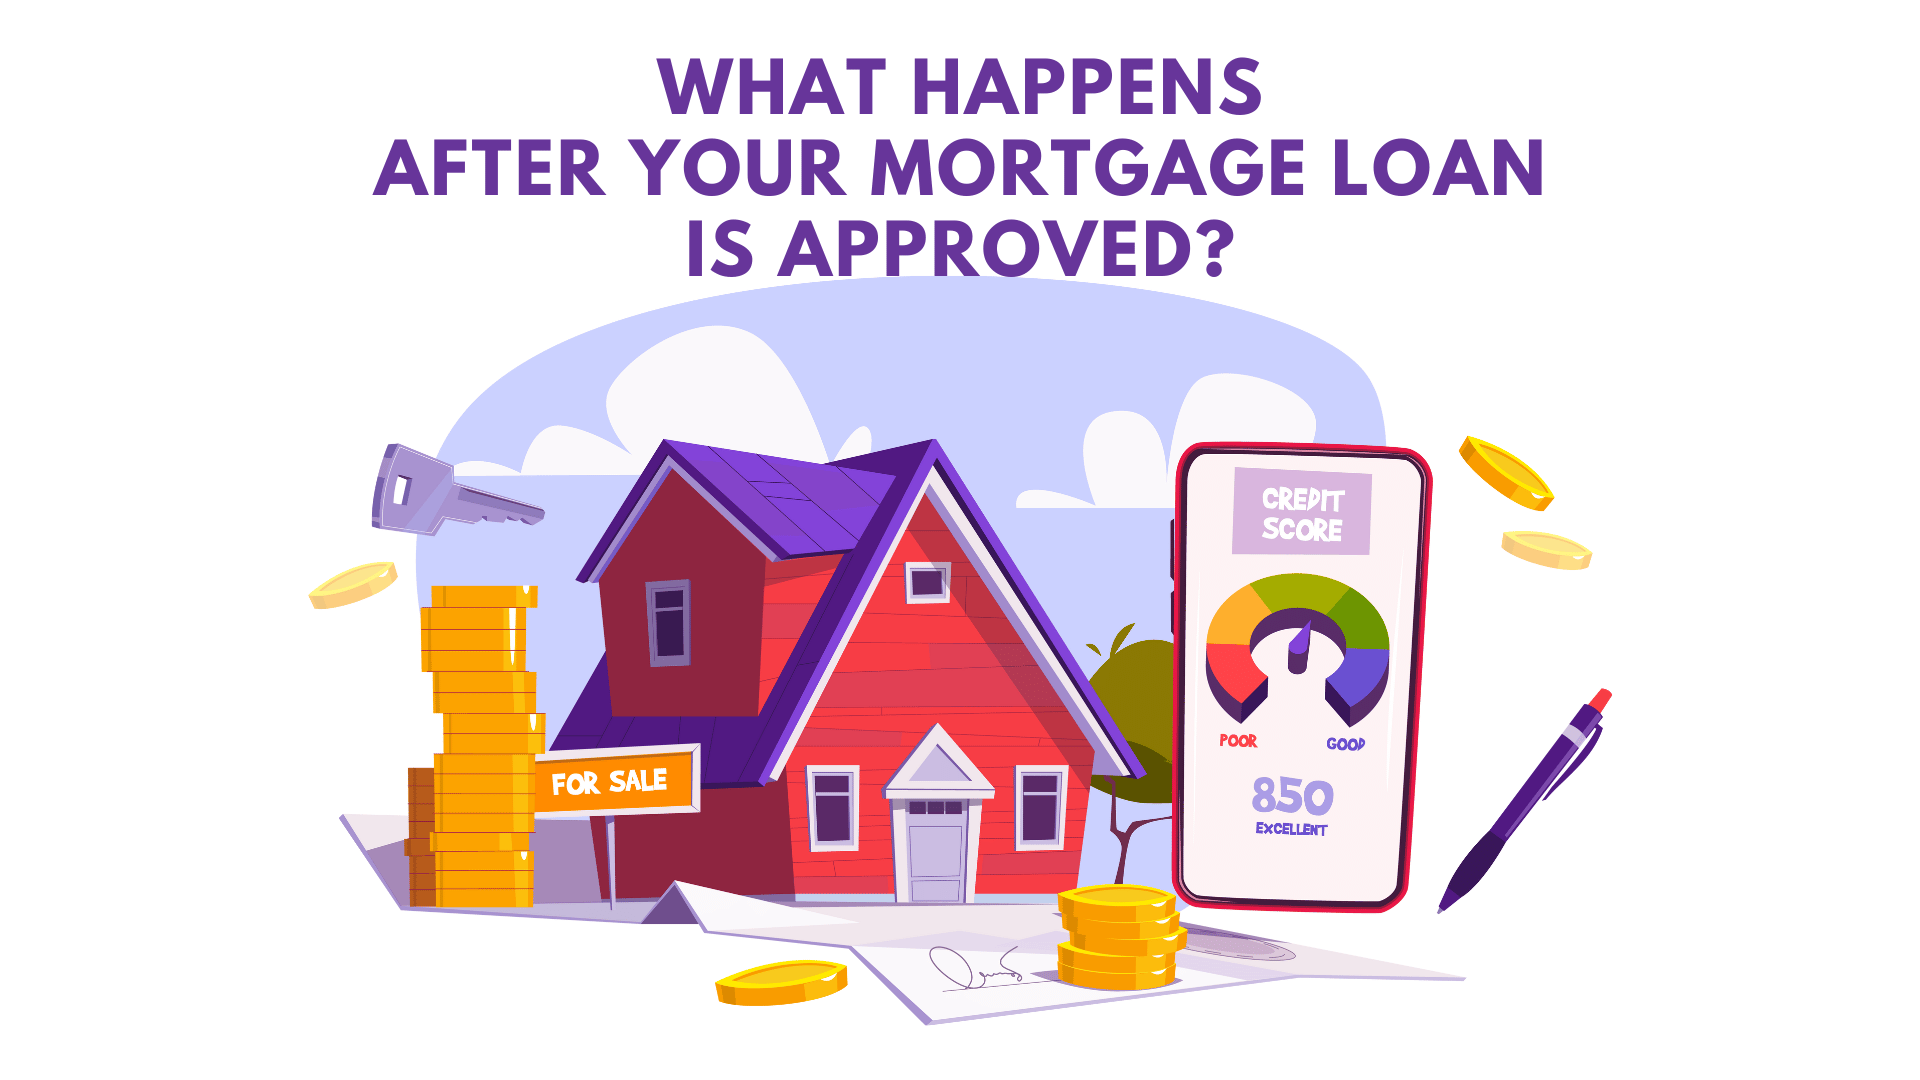 What Happens After Your Mortgage Loan is Approved?